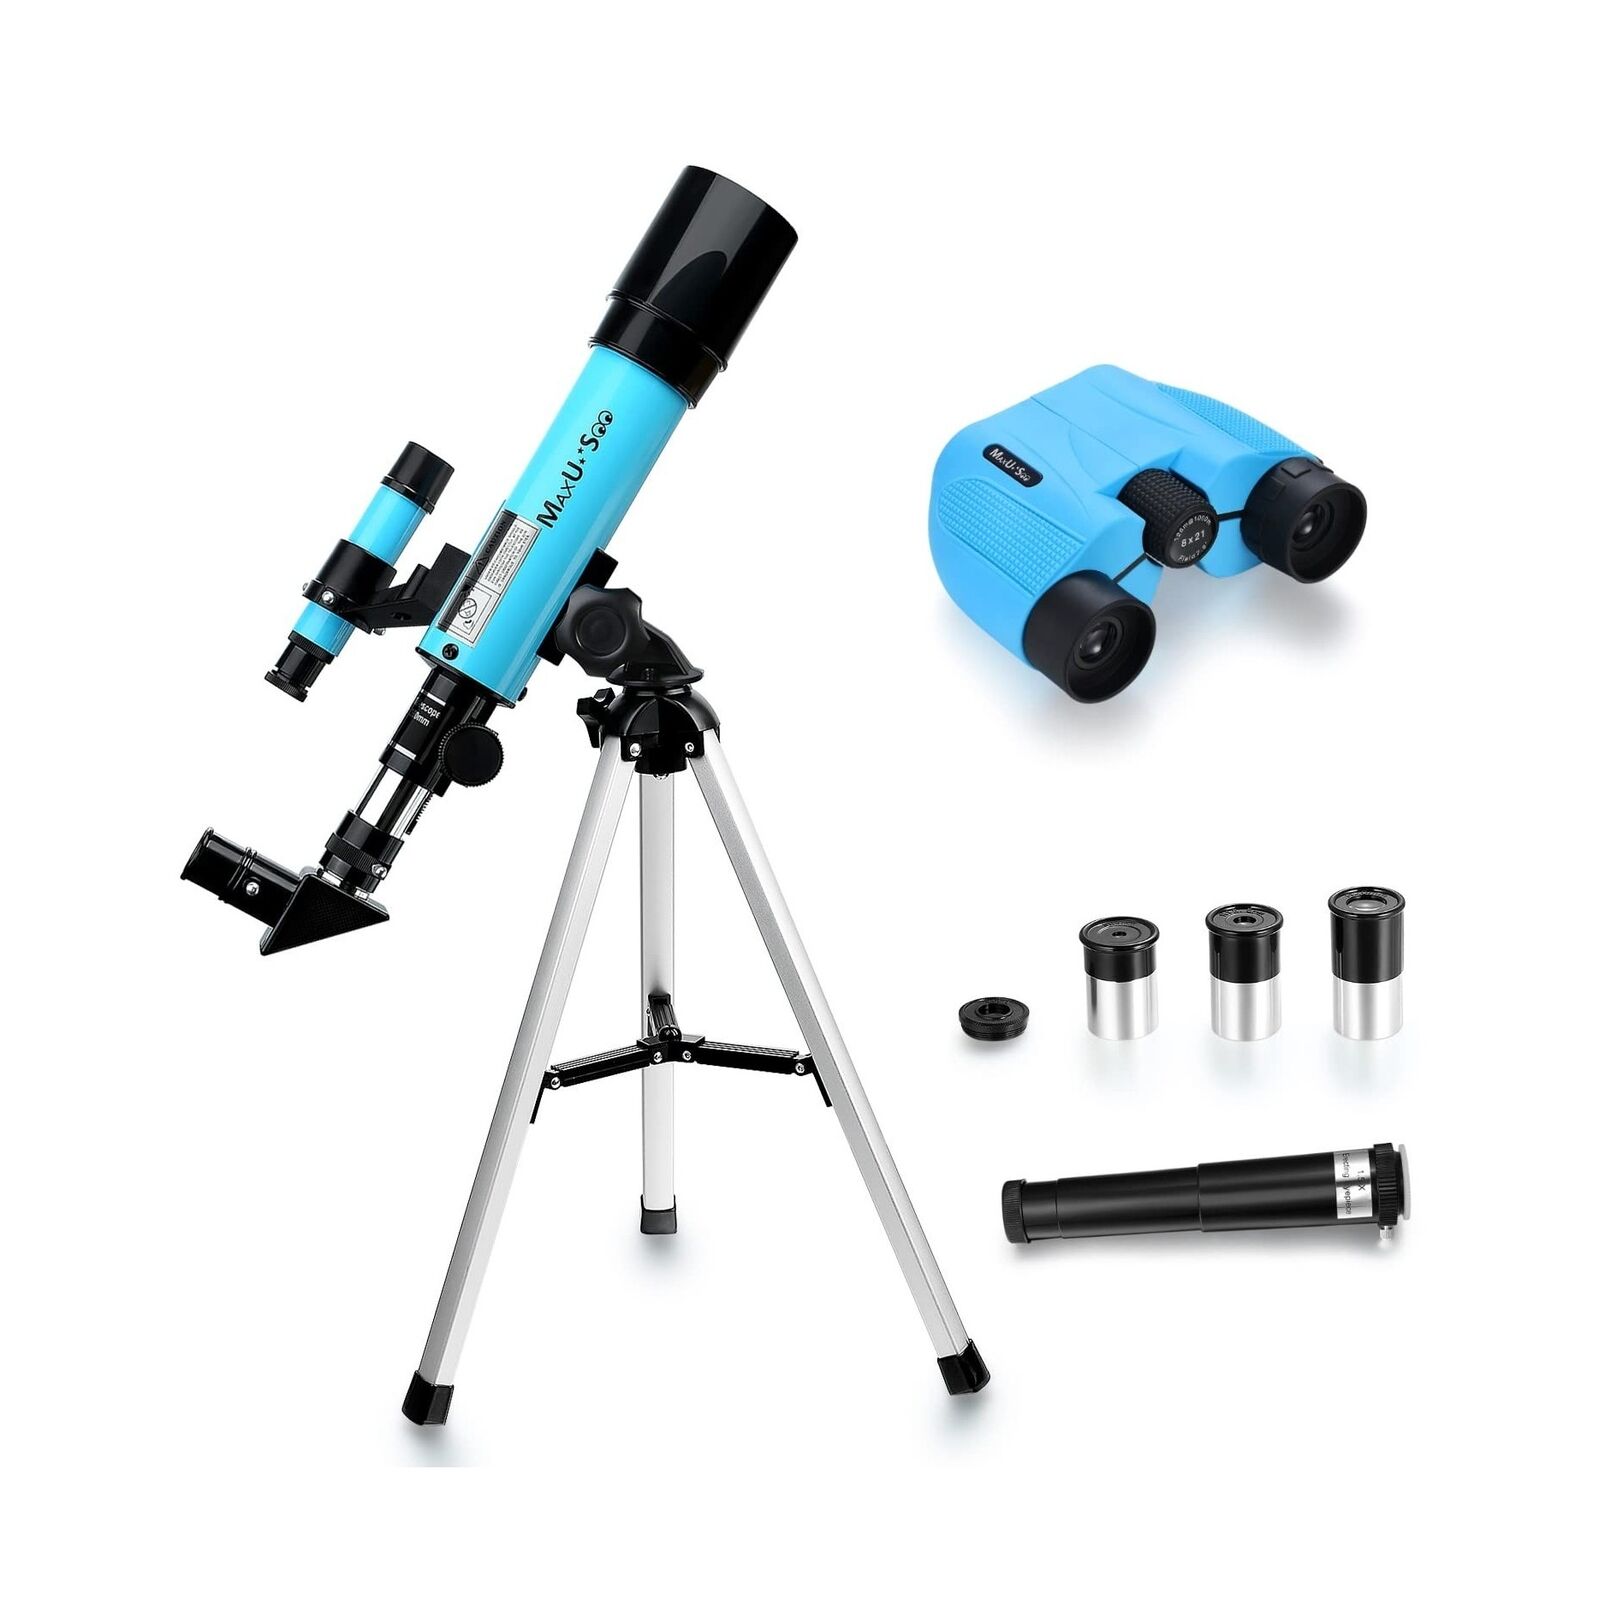 Lunar Telescope for Kids and Astronomy Beginners, Refractor Telescope with Fi...